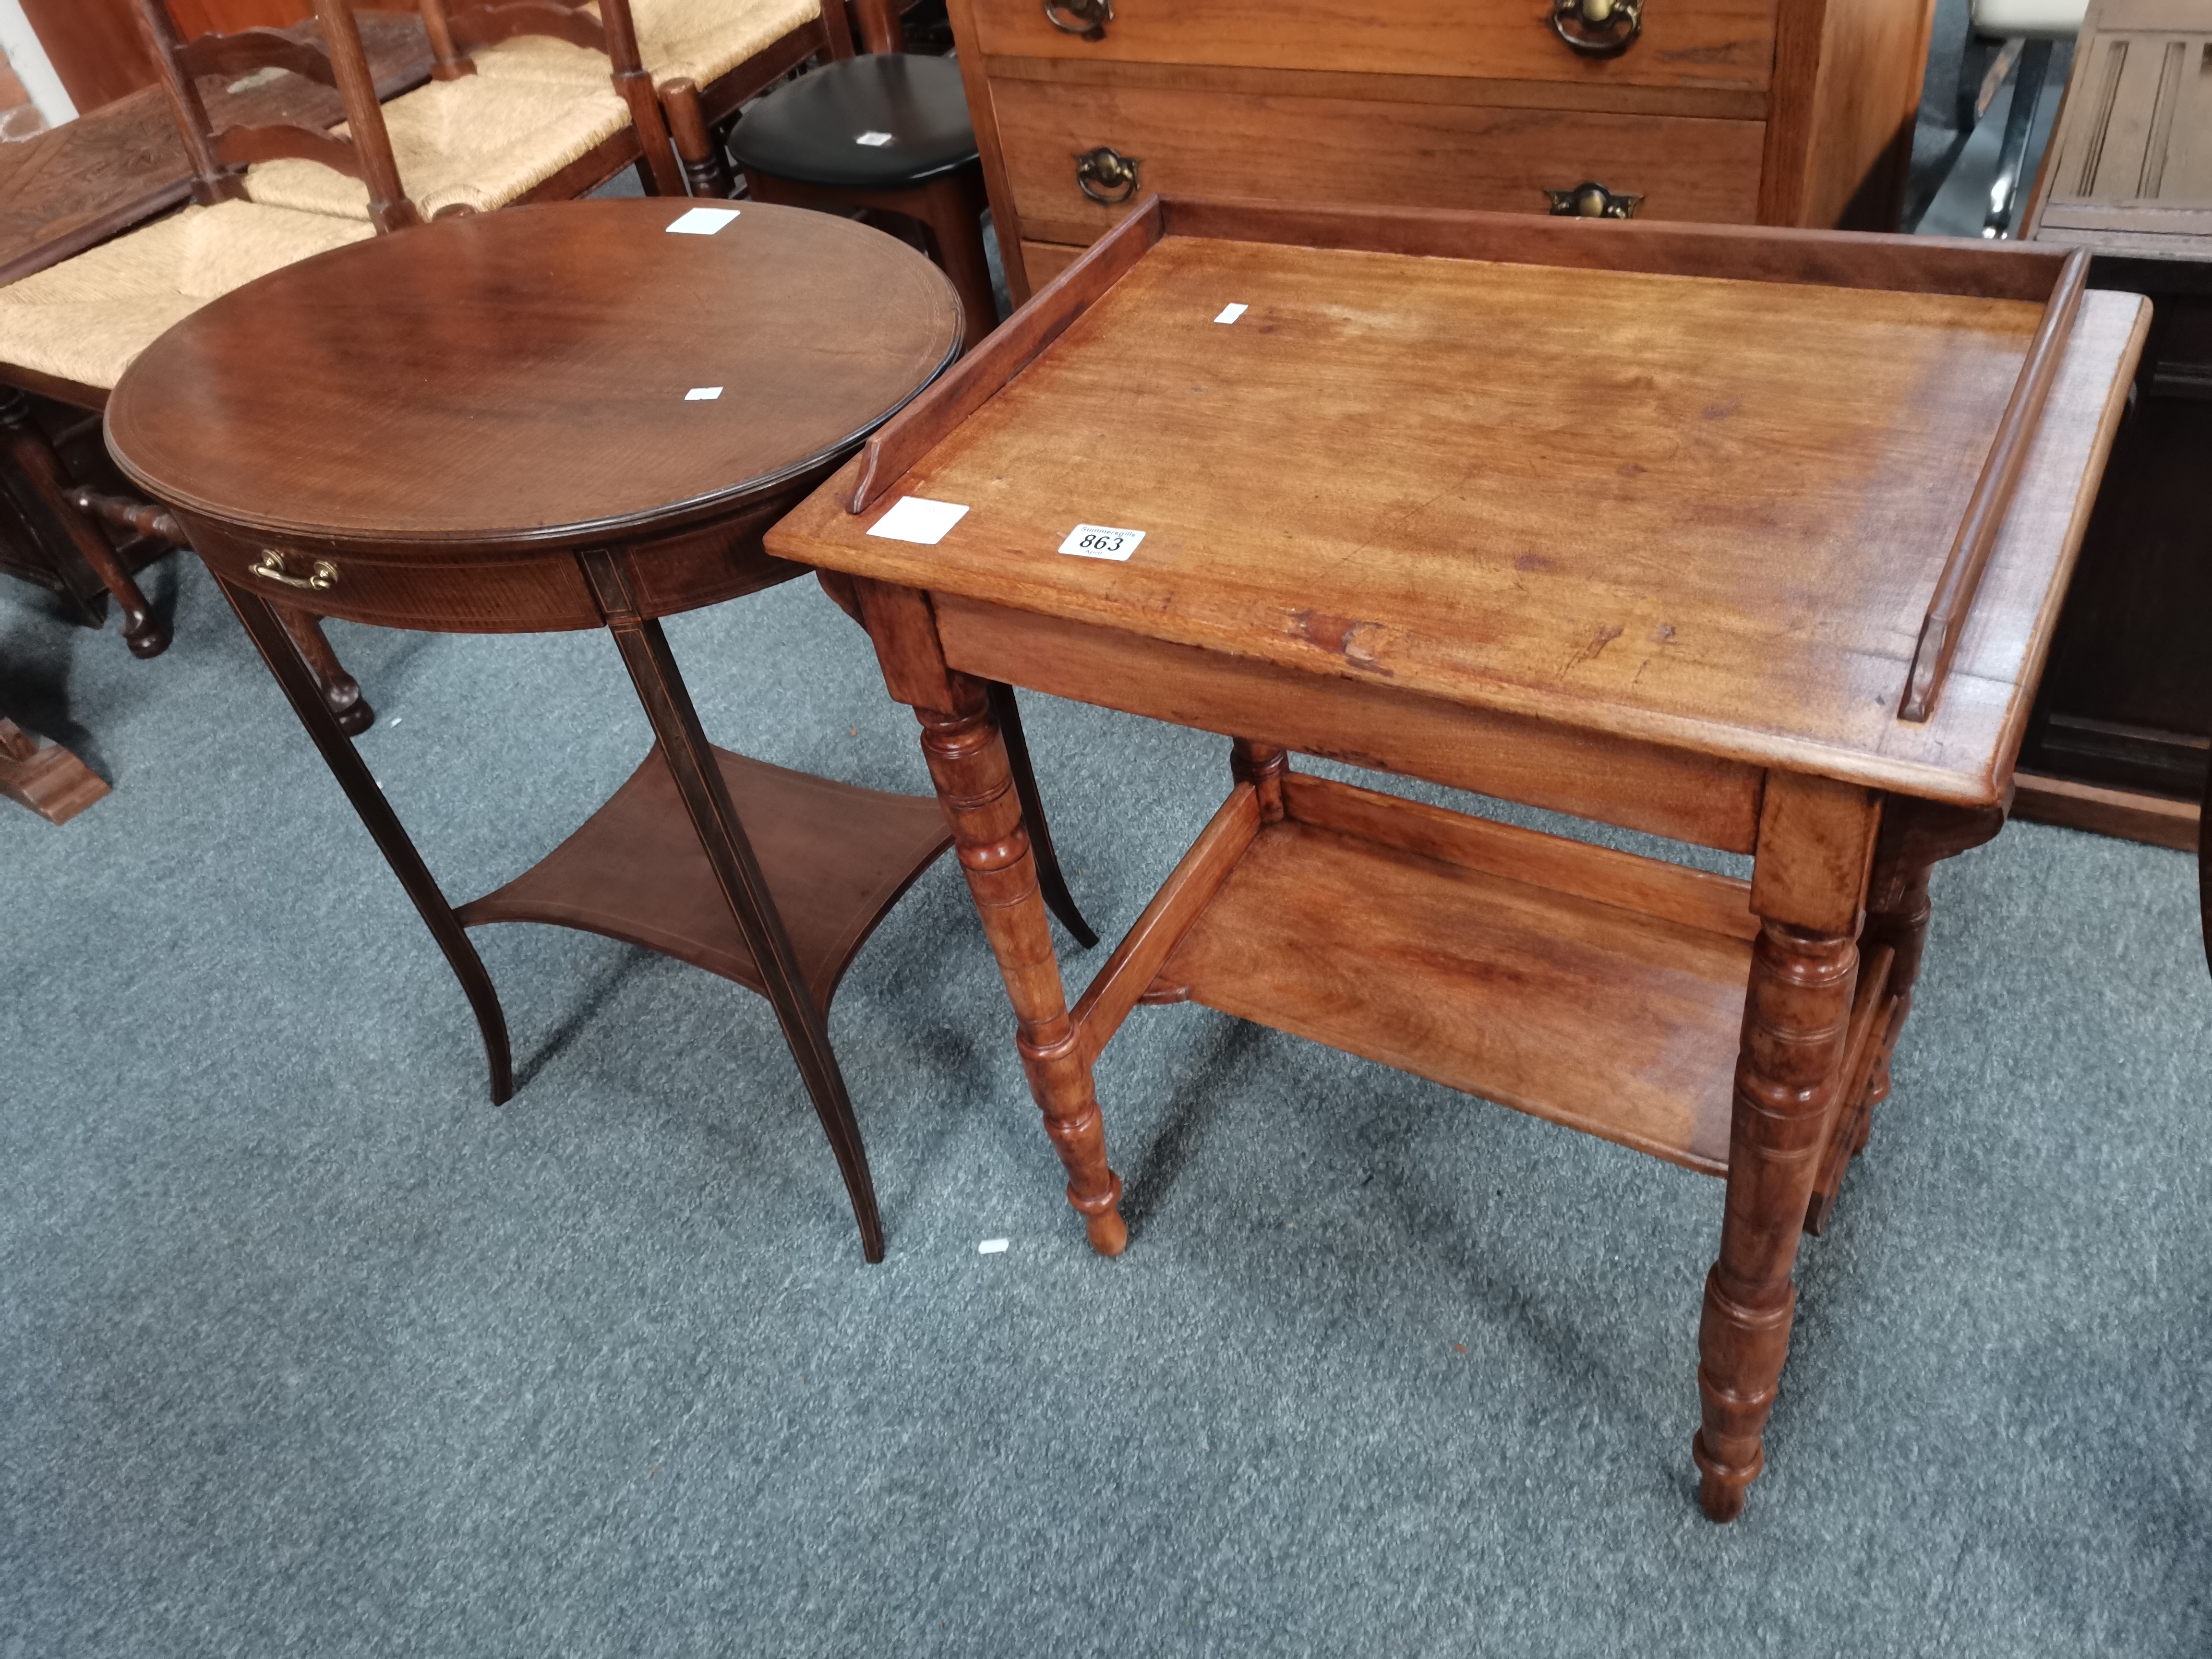 An Edwardian inlaid mahogany side table, plus a pine washstand